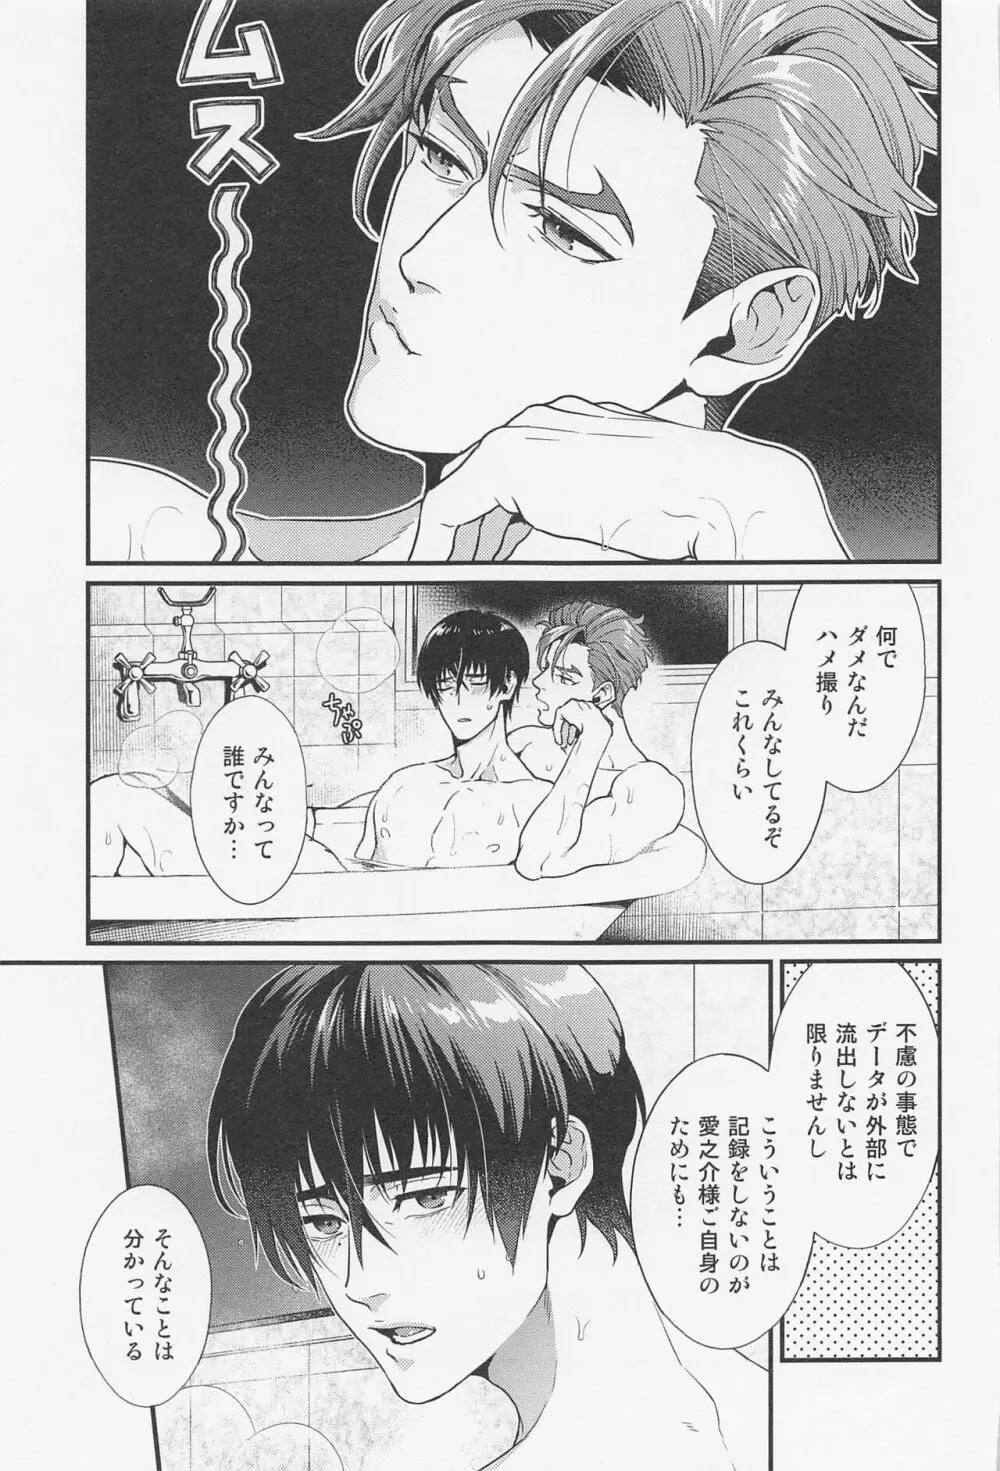 LOVE FIXED POINT - 愛の定点観測 - page30